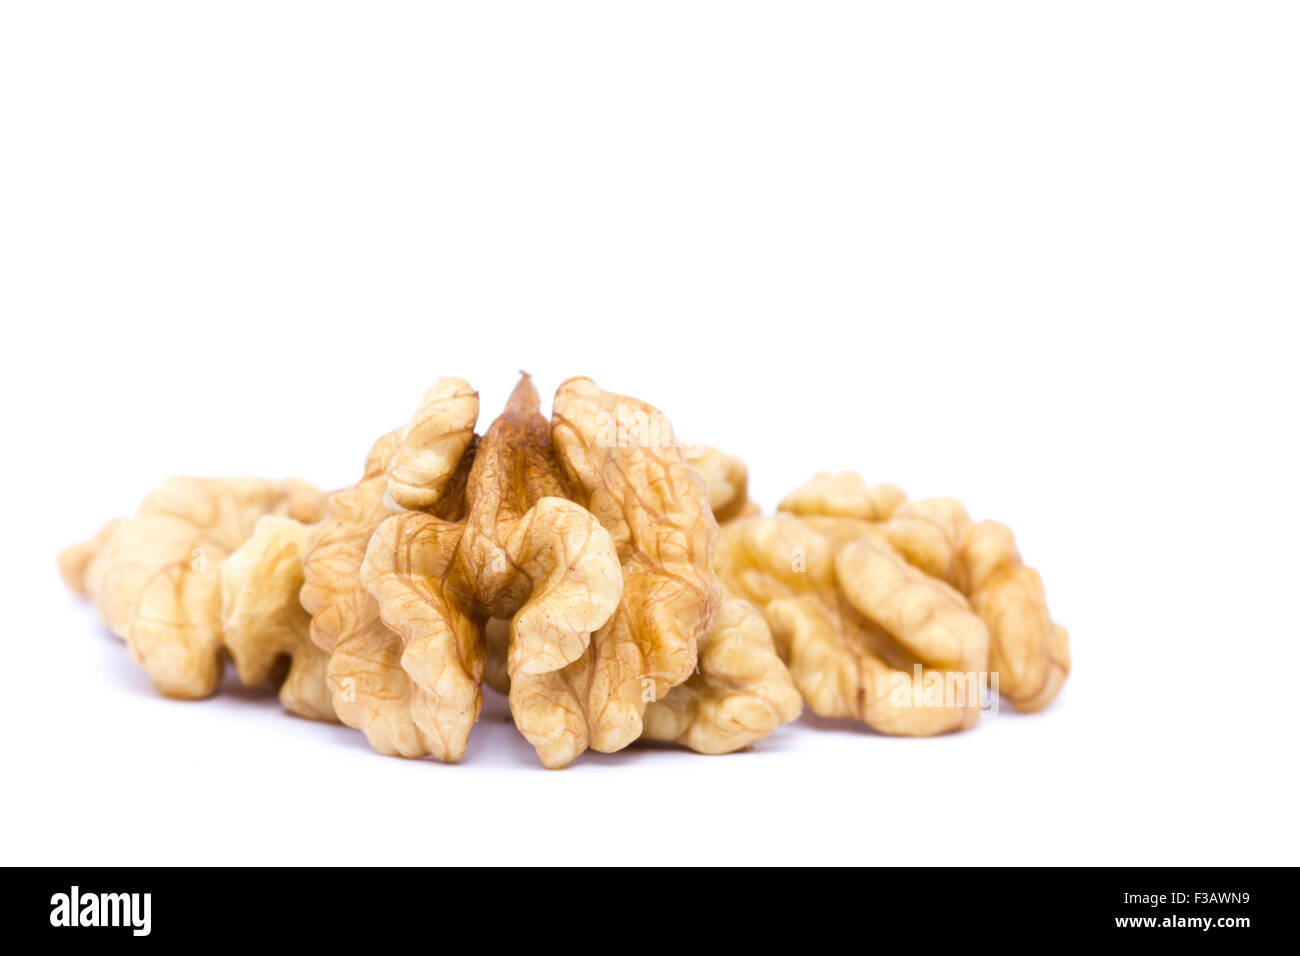 Small group of walnuts on a white background. Stock Photo